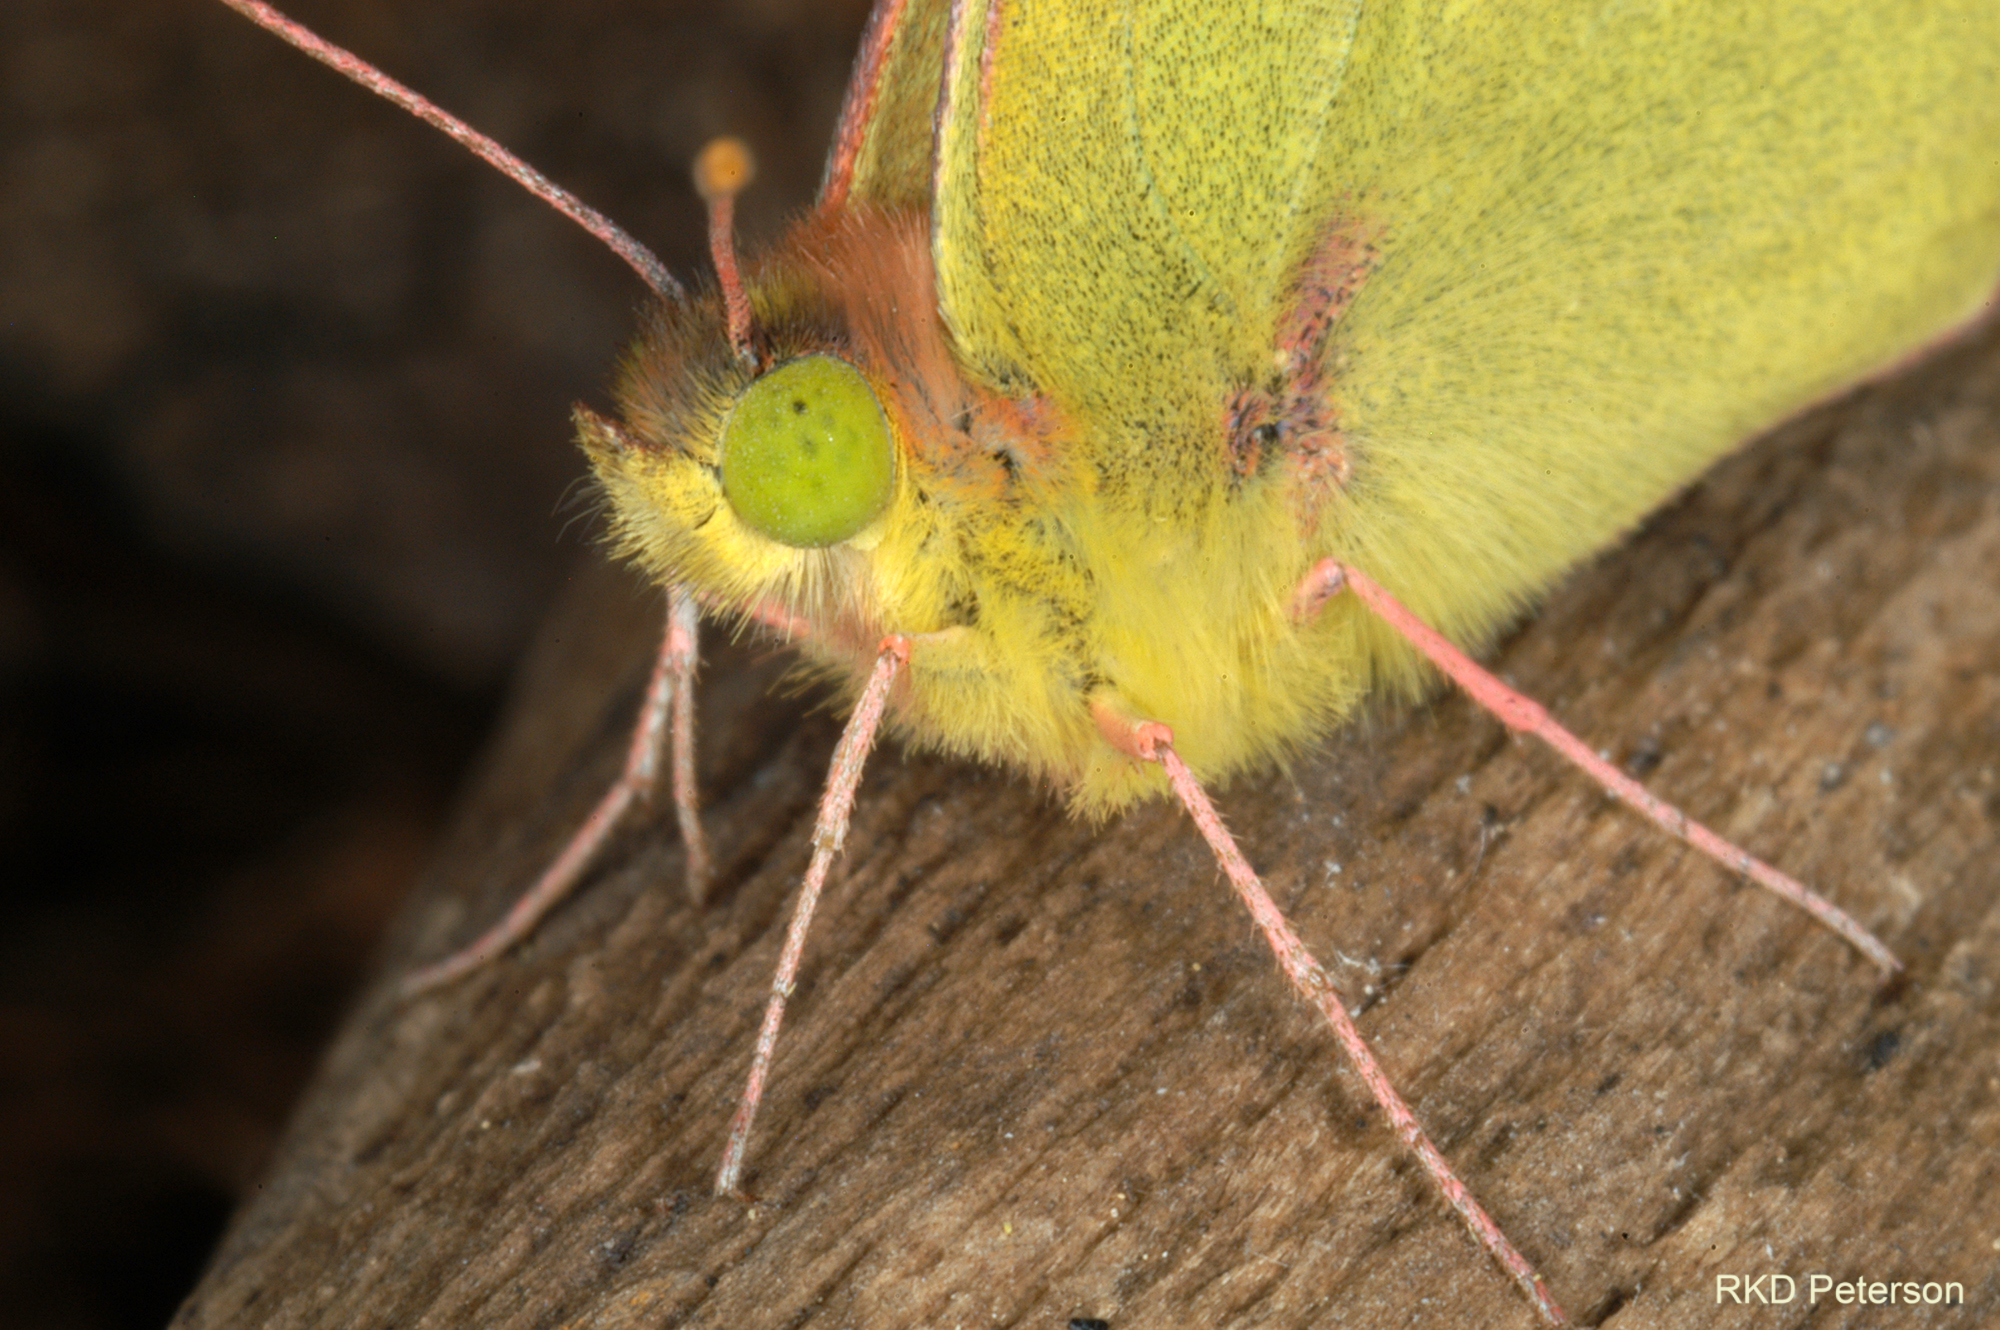 Colias - sulfur butterfly